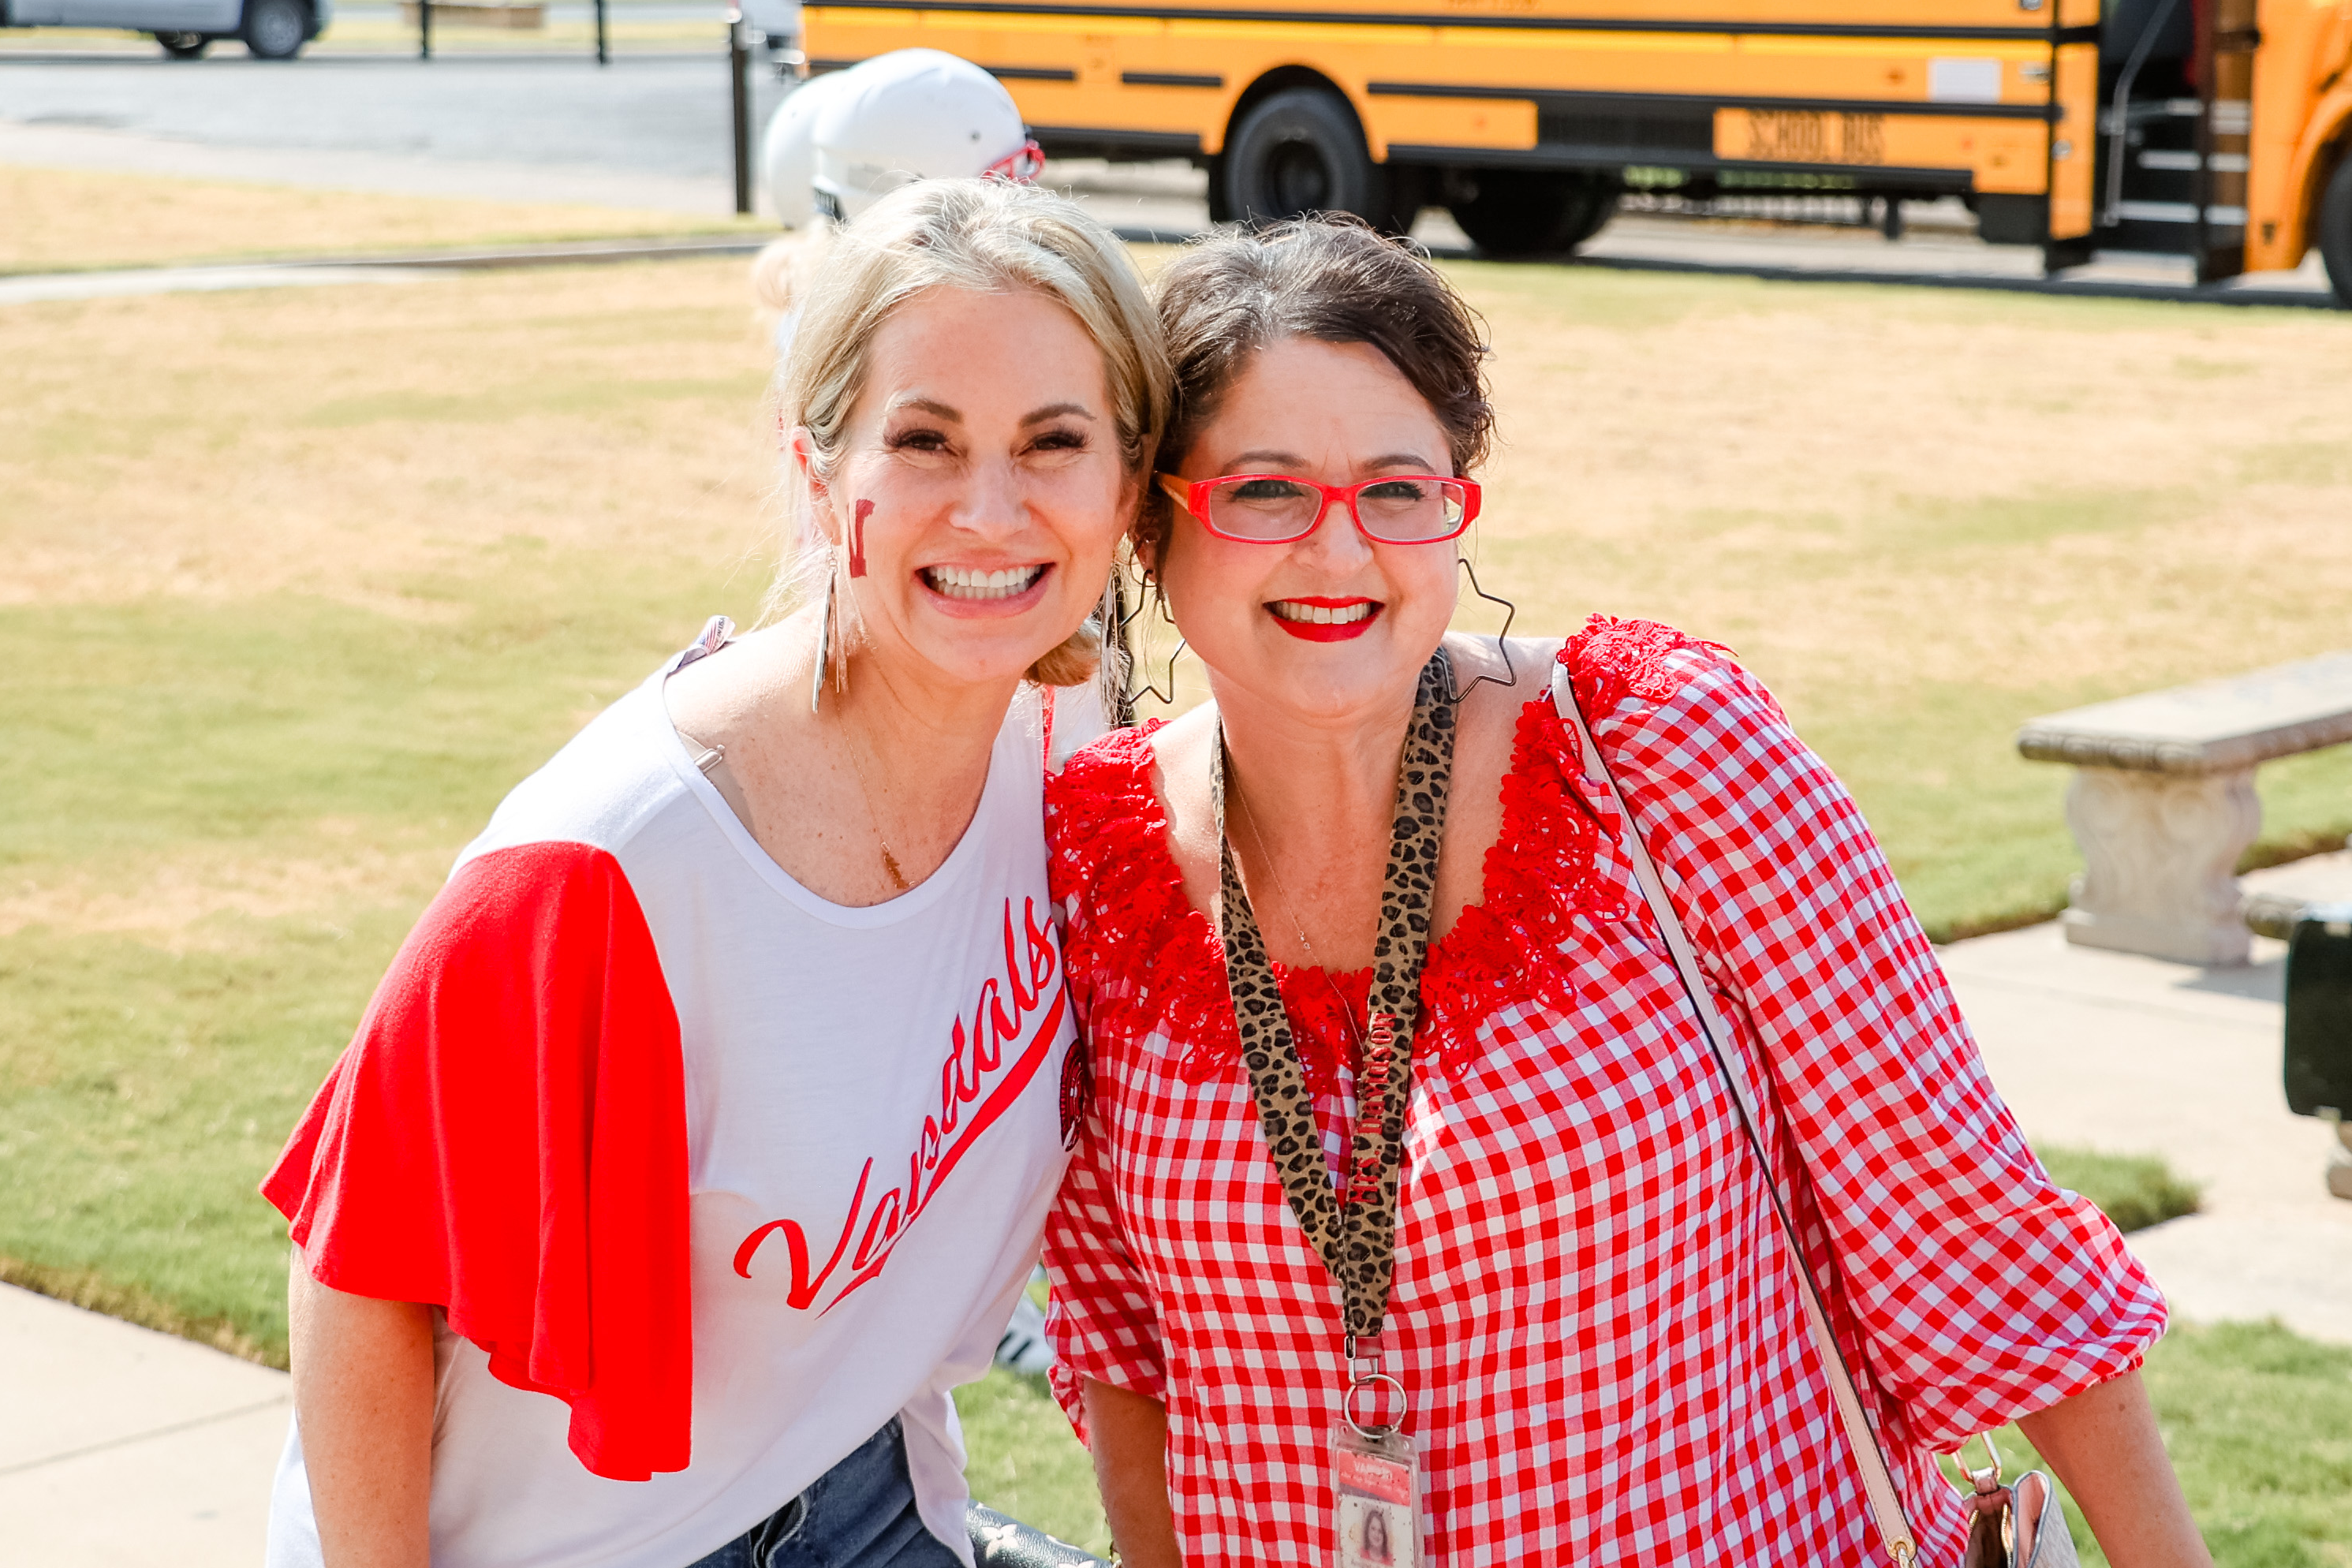 two teachers smile together for a photo in front of a school bus